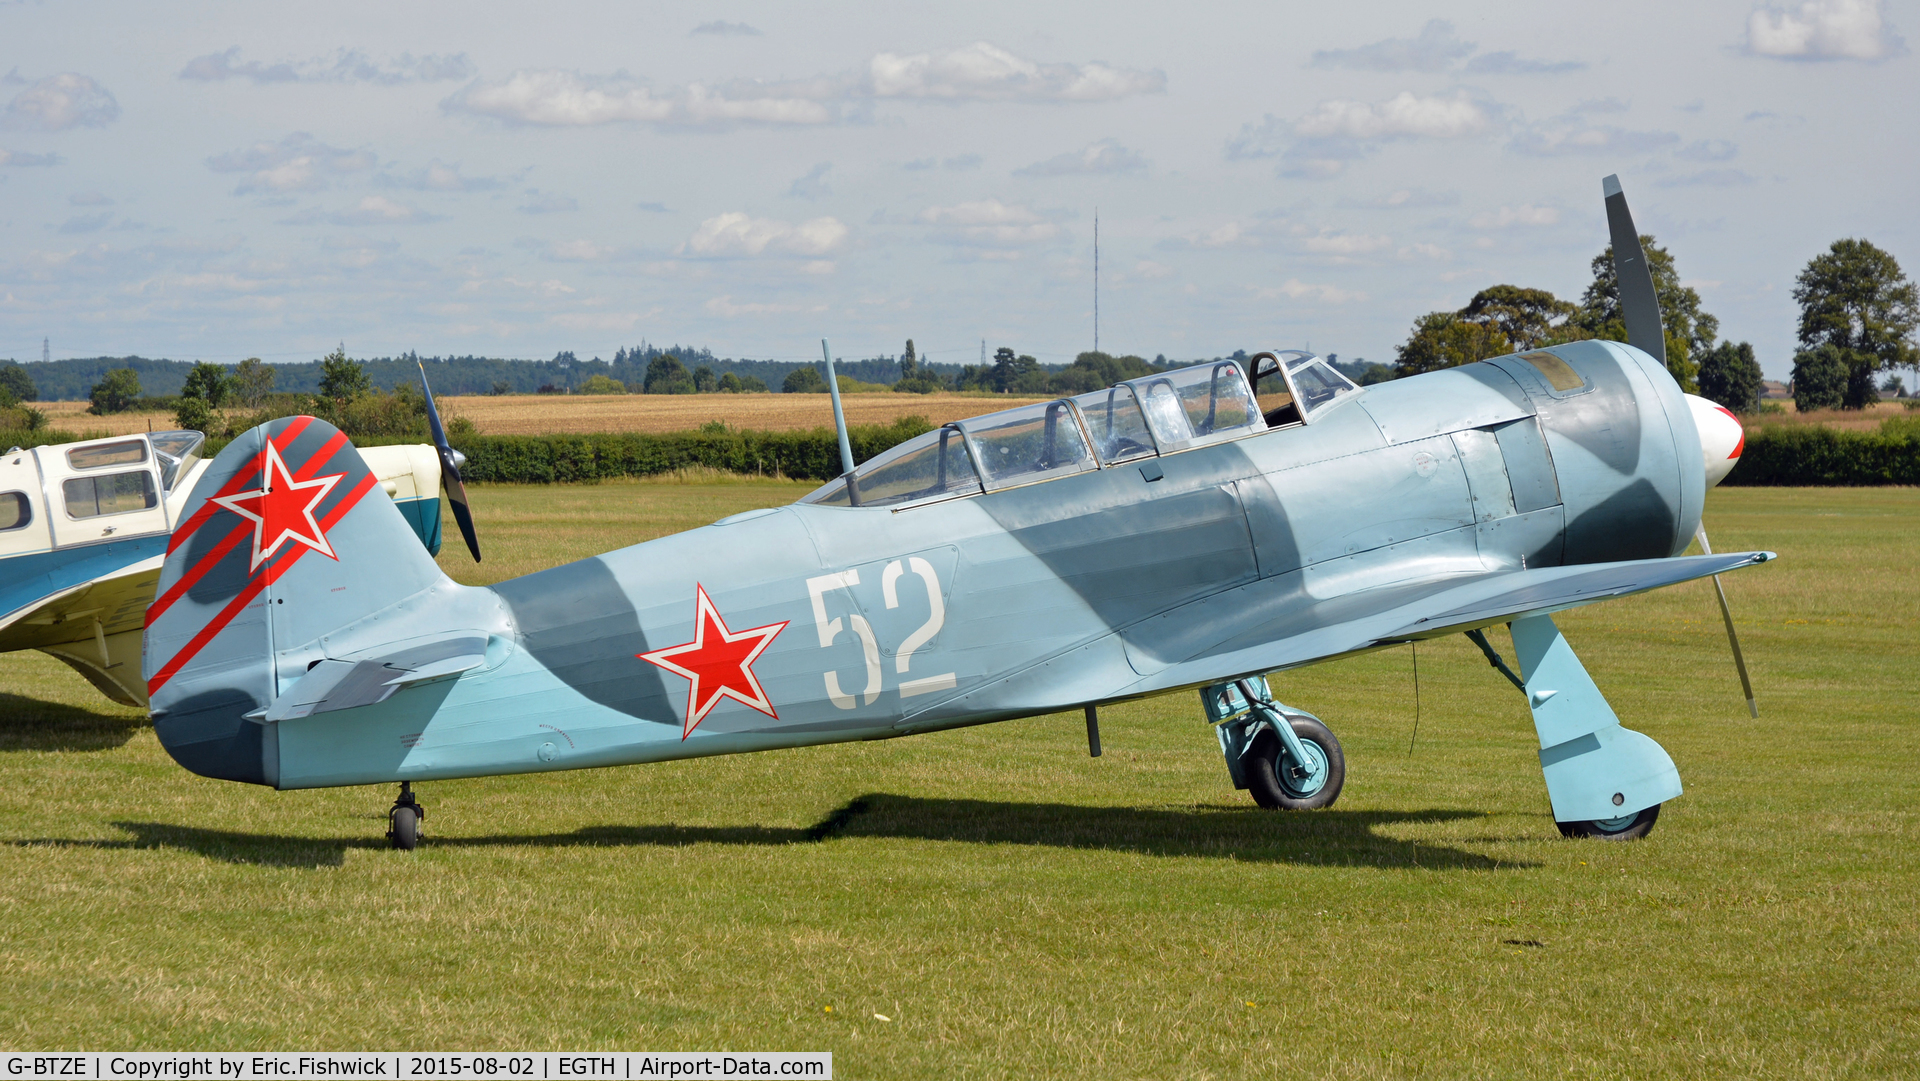 G-BTZE, 1955 Let C-11 (Yak-11) C/N 171312, 2. G-BTZE on the flight line at The Shuttleworth Wings and Wheels Airshow, Aug. 2015.